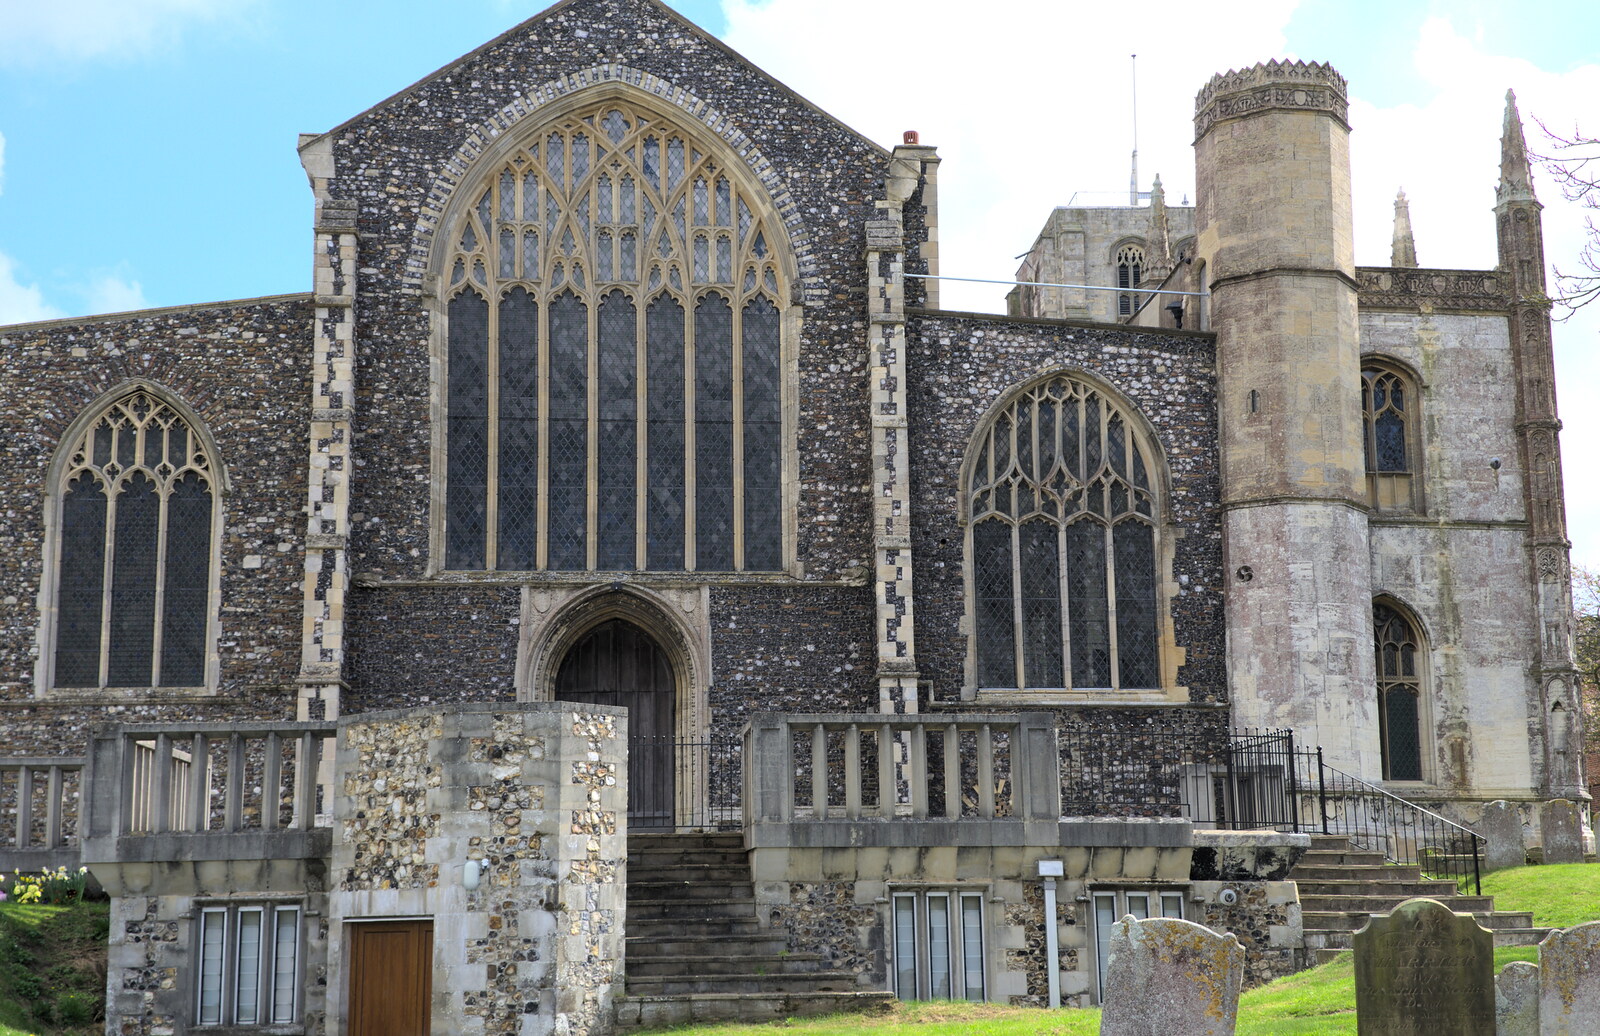 The nave window of St. Michael's from A Postcard from Beccles, Suffolk - 2nd April 2017